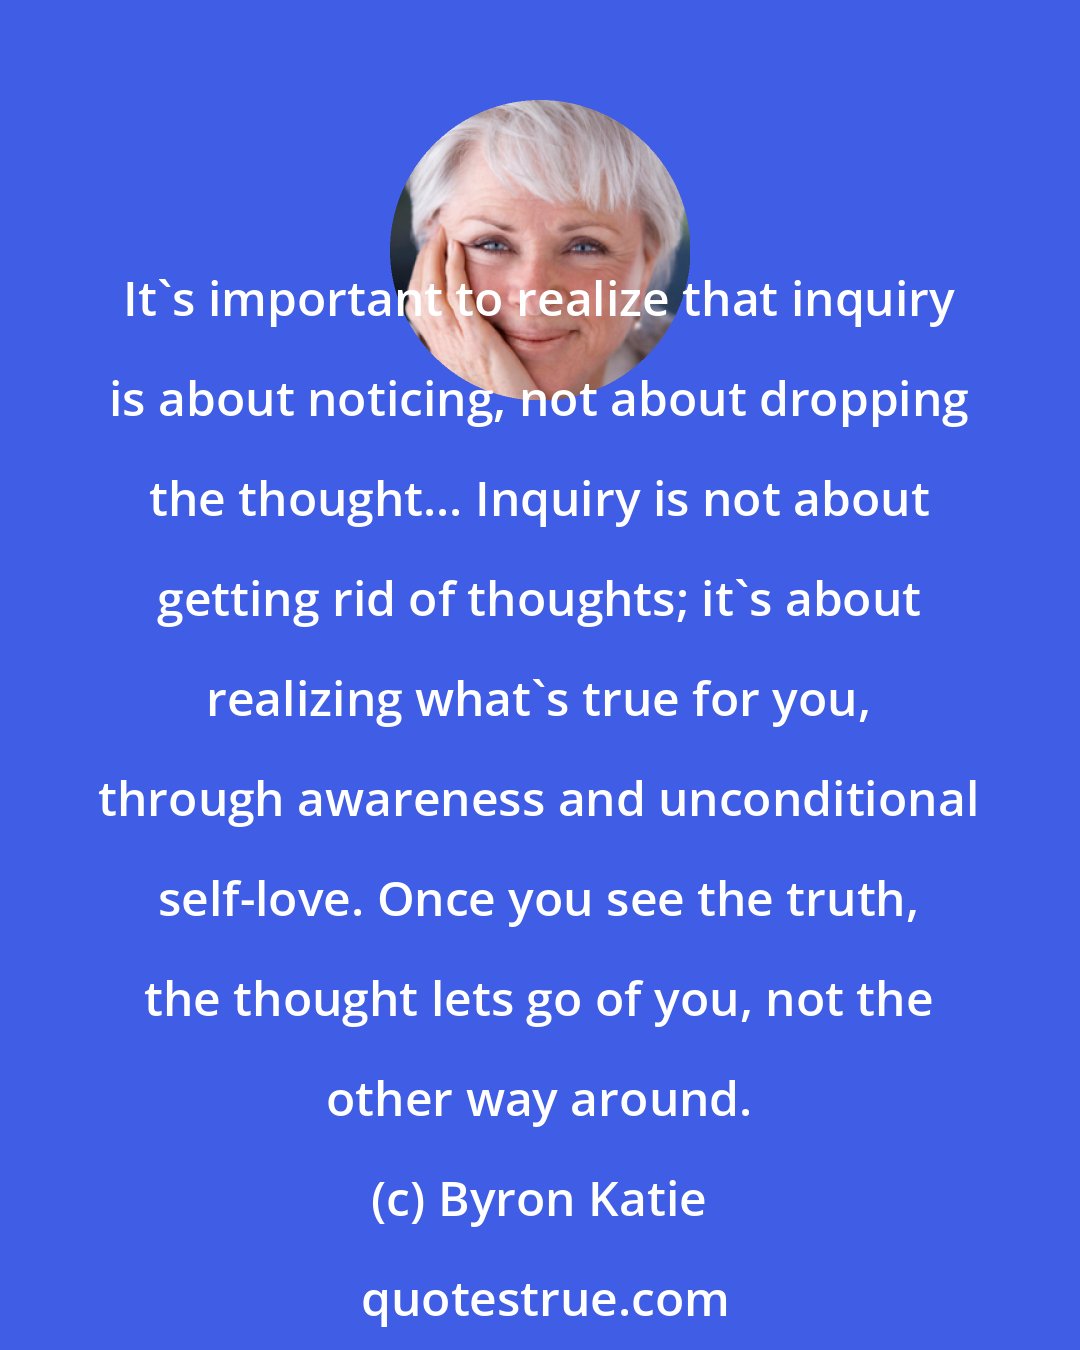 Byron Katie: It's important to realize that inquiry is about noticing, not about dropping the thought... Inquiry is not about getting rid of thoughts; it's about realizing what's true for you, through awareness and unconditional self-love. Once you see the truth, the thought lets go of you, not the other way around.